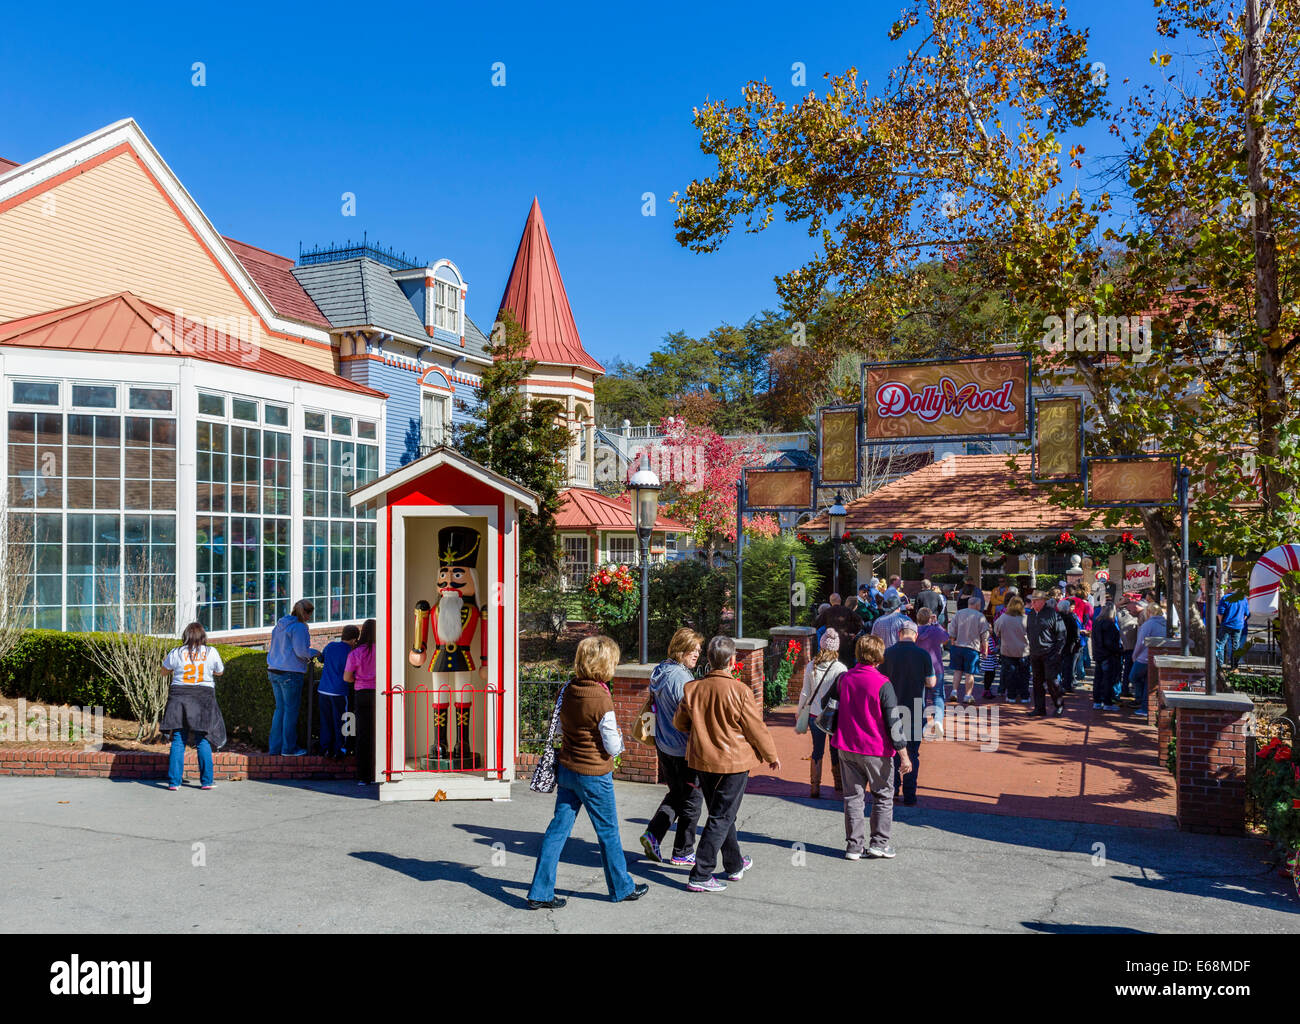 Entrance to Dollywood theme park in the holiday season, Pigeon Forge, Tennessee, USA Stock Photo